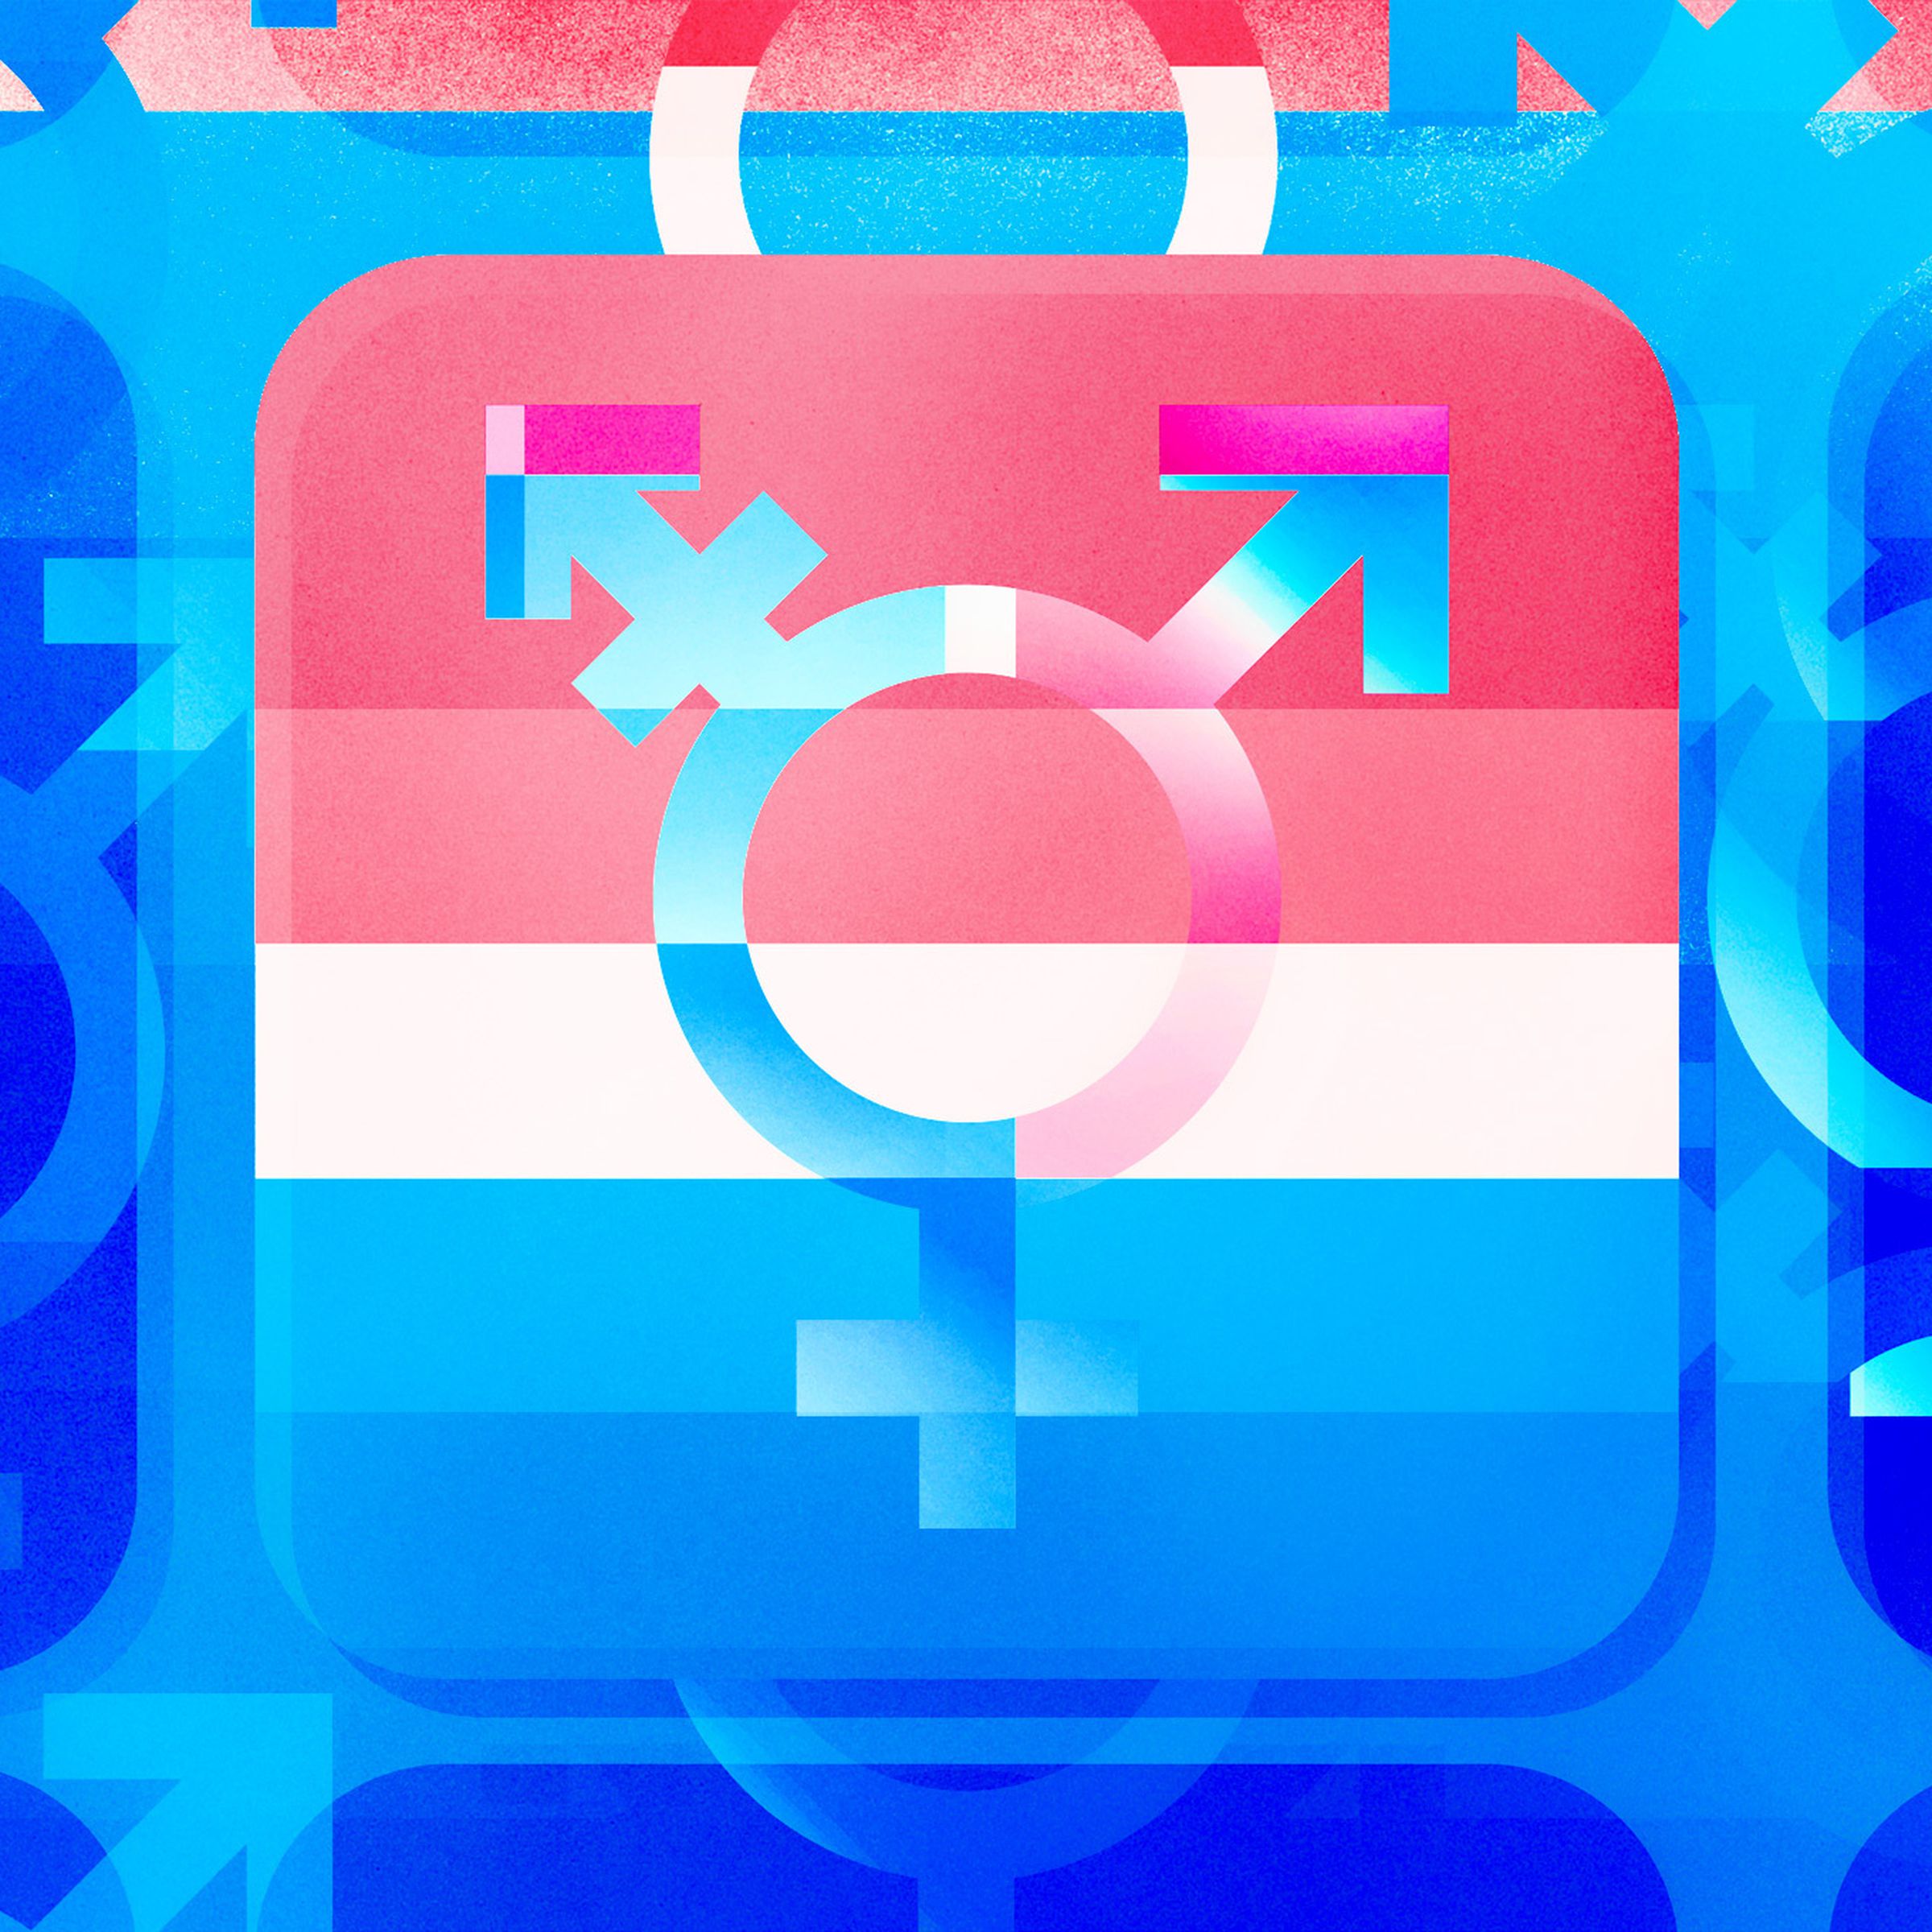 The transgender symbol in a square that looks like an app icon, overlapping with stripes of pink, white, and blue. Glitchy iterations of the symbol appear in the blue background.